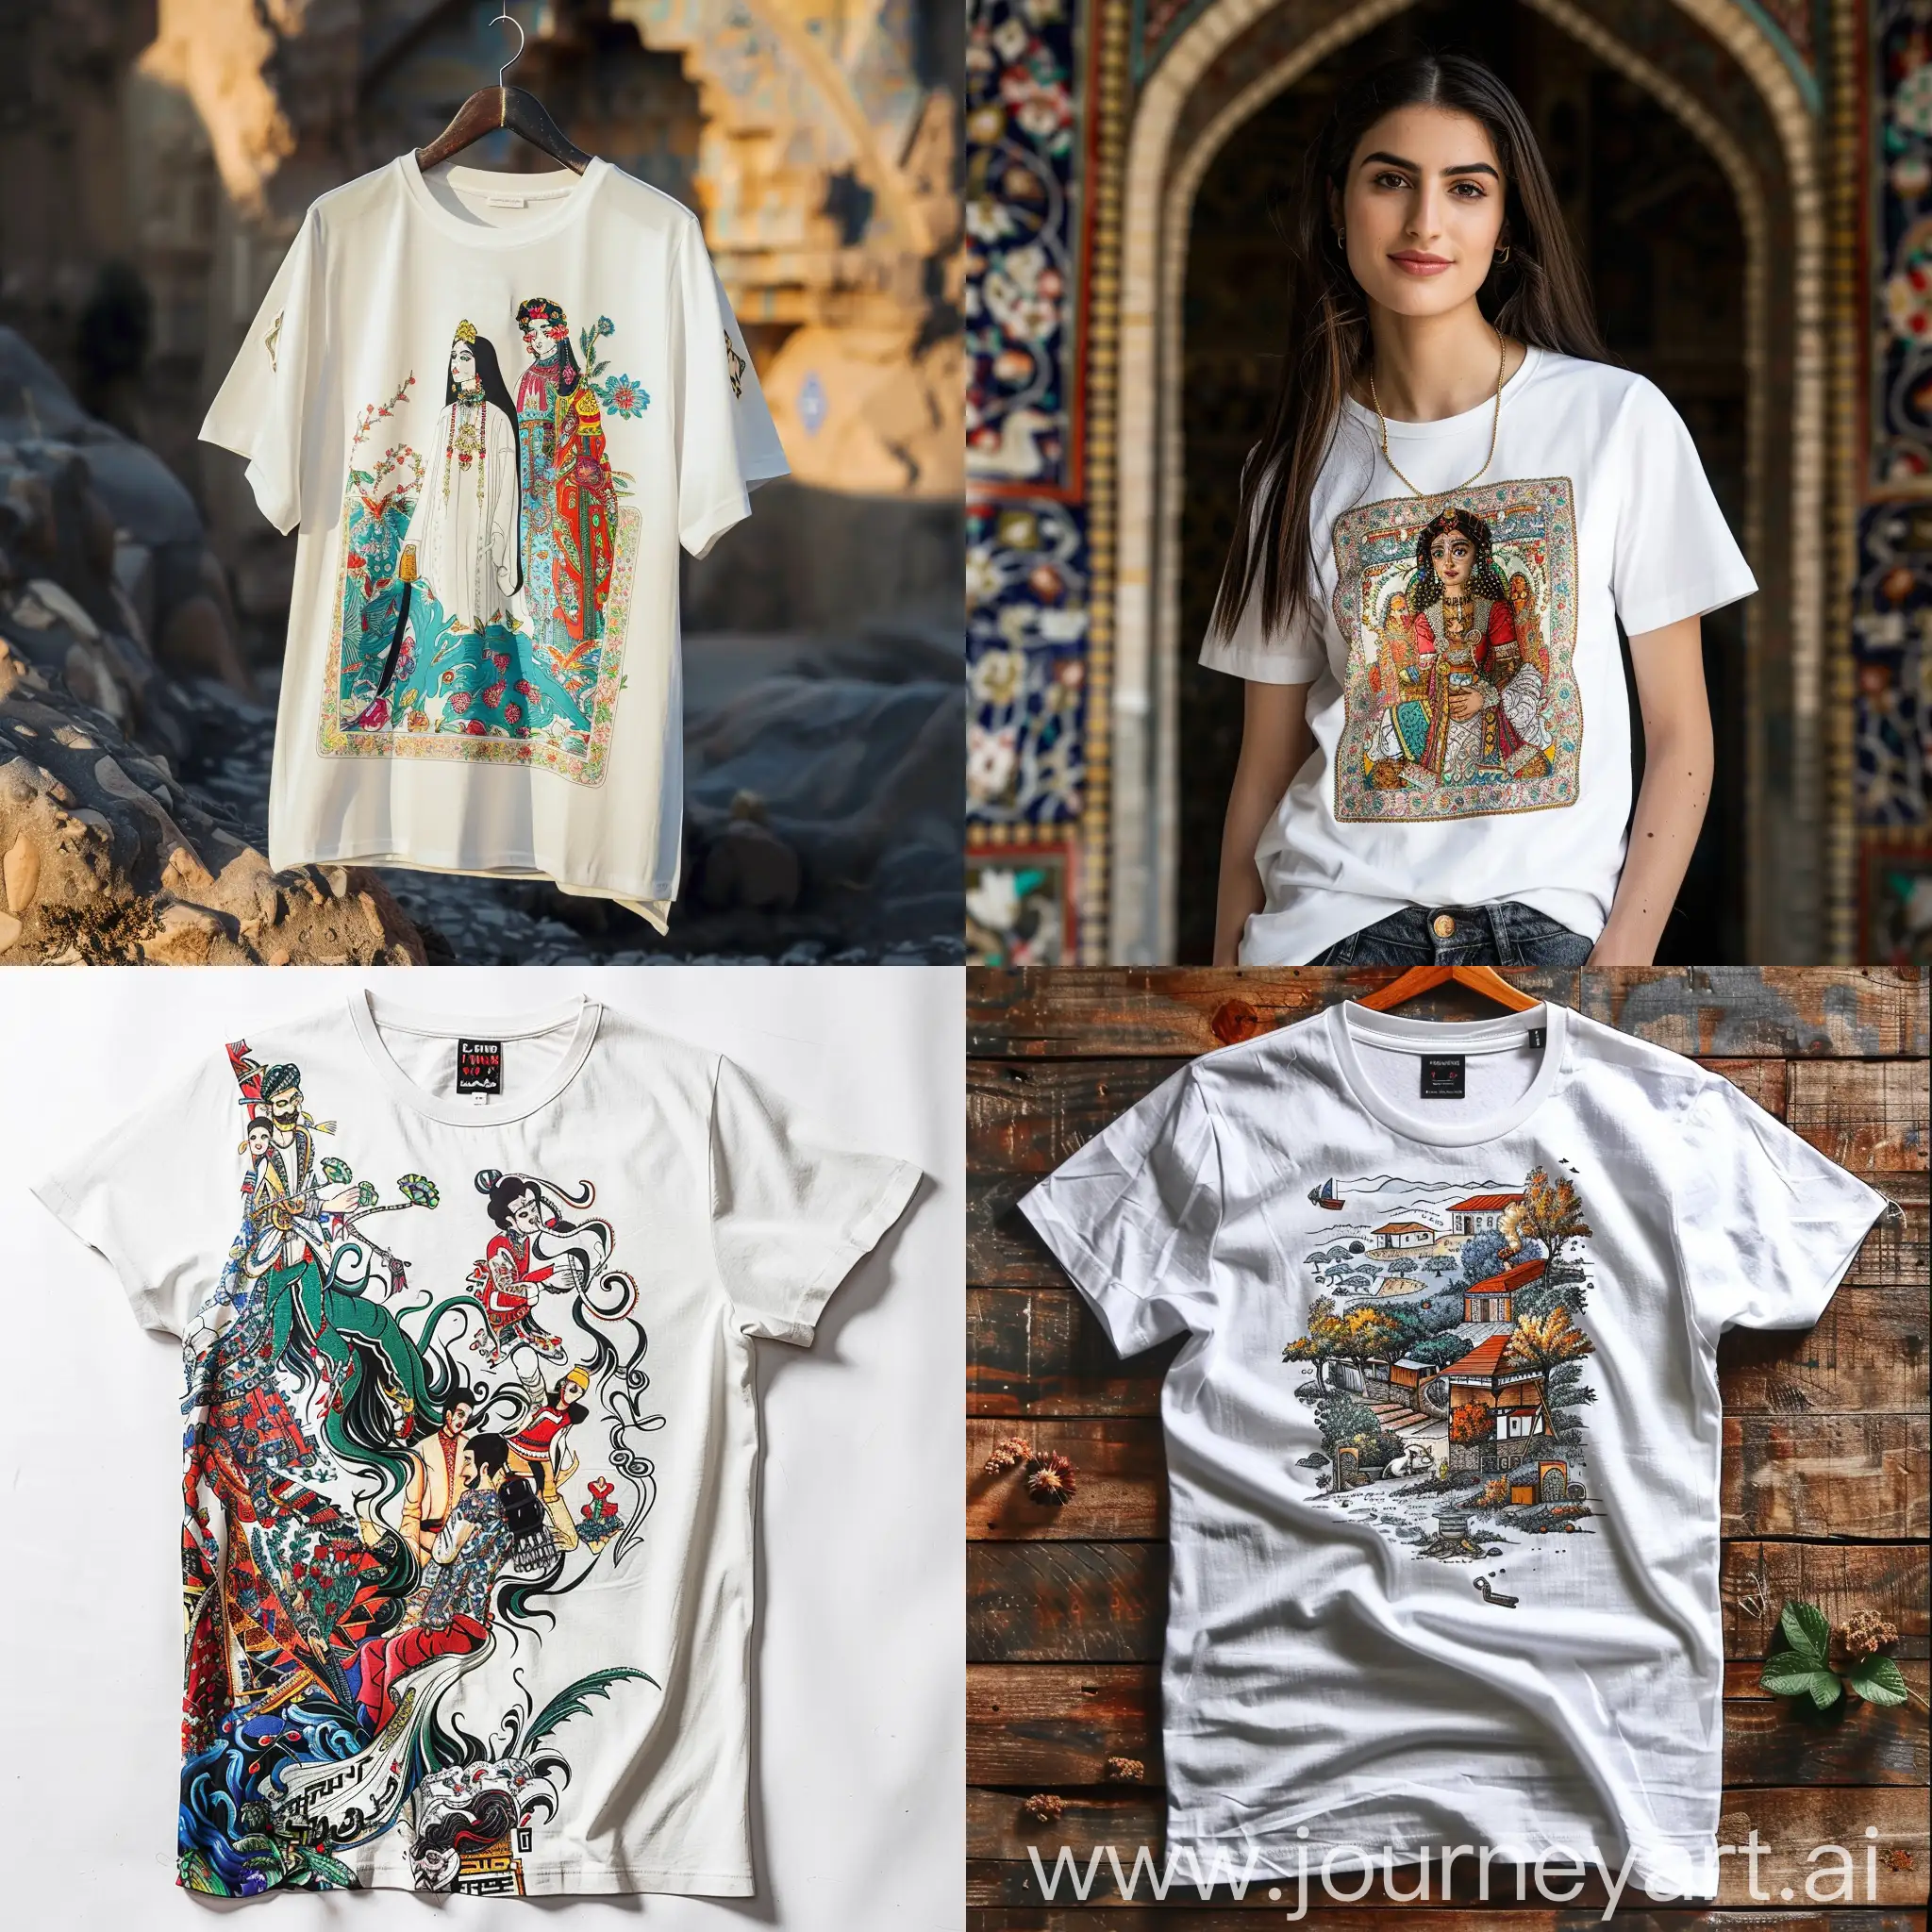 Authentic-Iranian-Culture-White-TShirt-with-Original-Designs